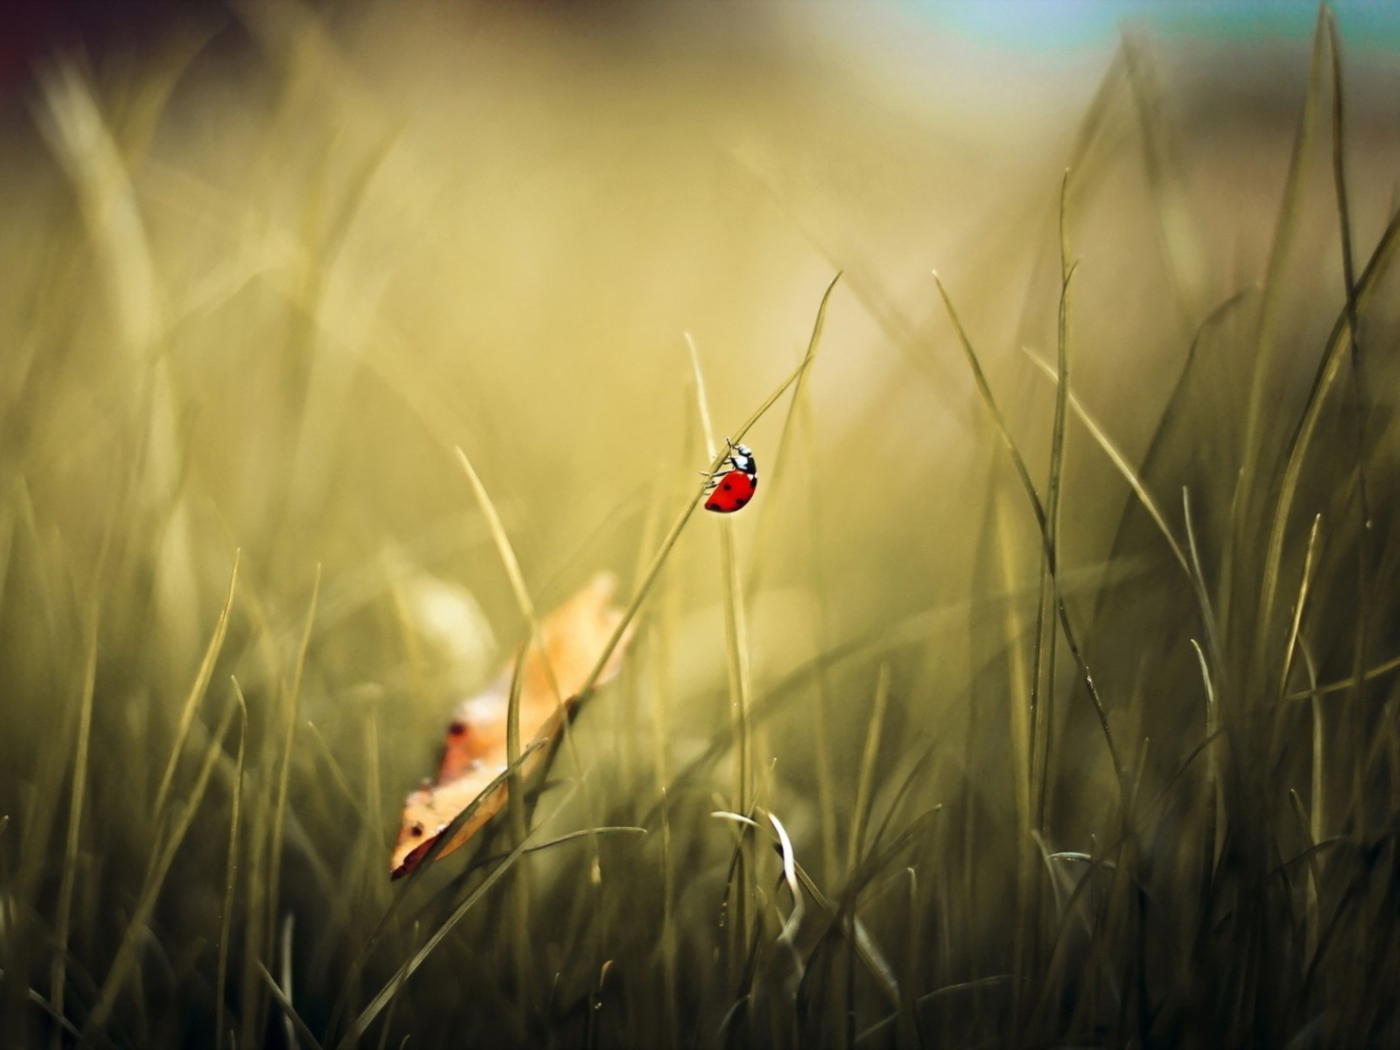 Lady Bug At Meadow wallpaper 1400x1050